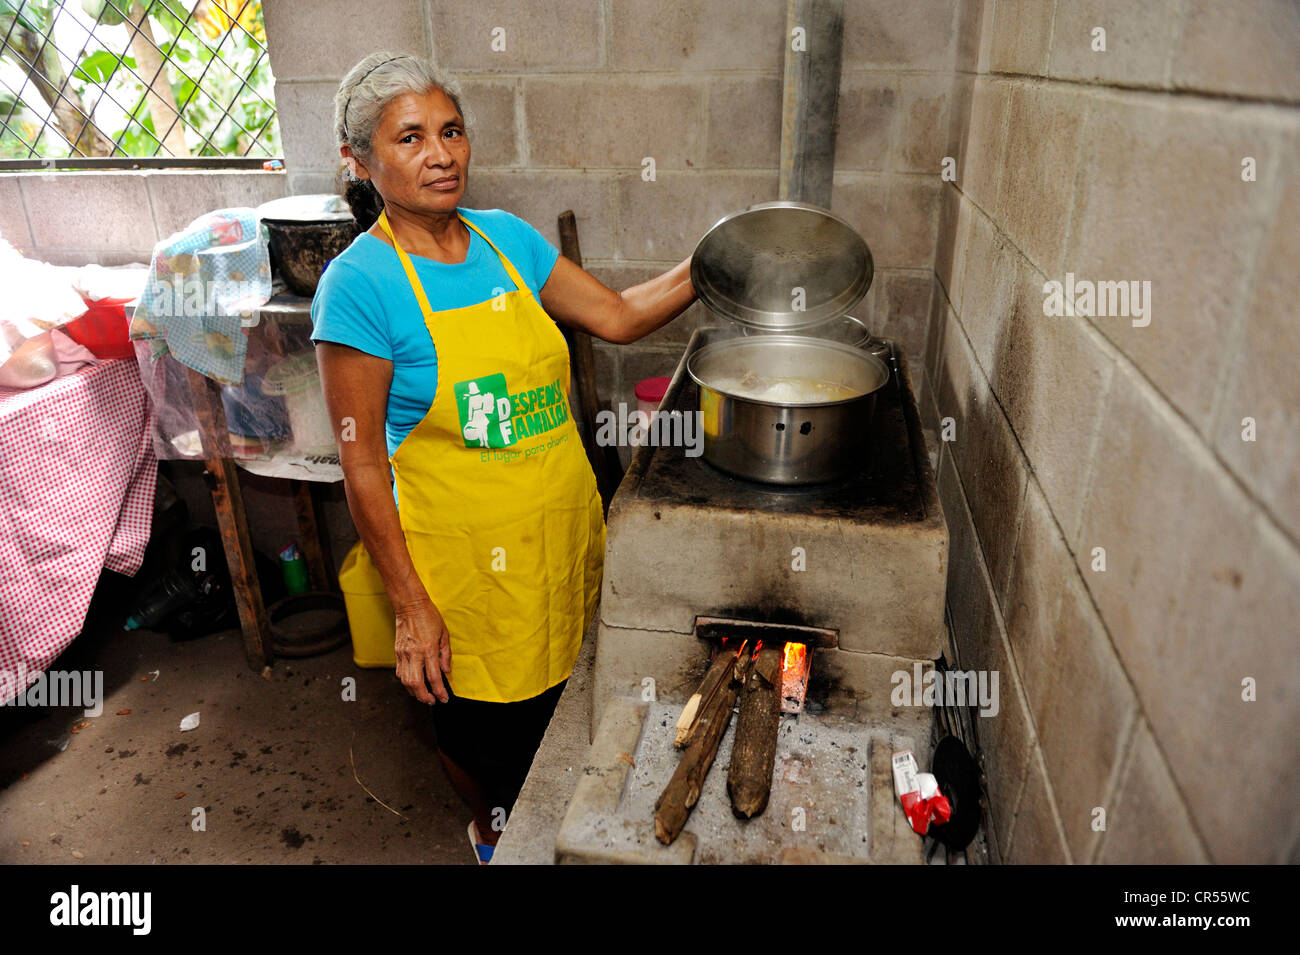 Female cook lifting the lid of a pot, cooking on an energy-saving stove, community of Cerro Verde, El Salvador, Central America Stock Photo